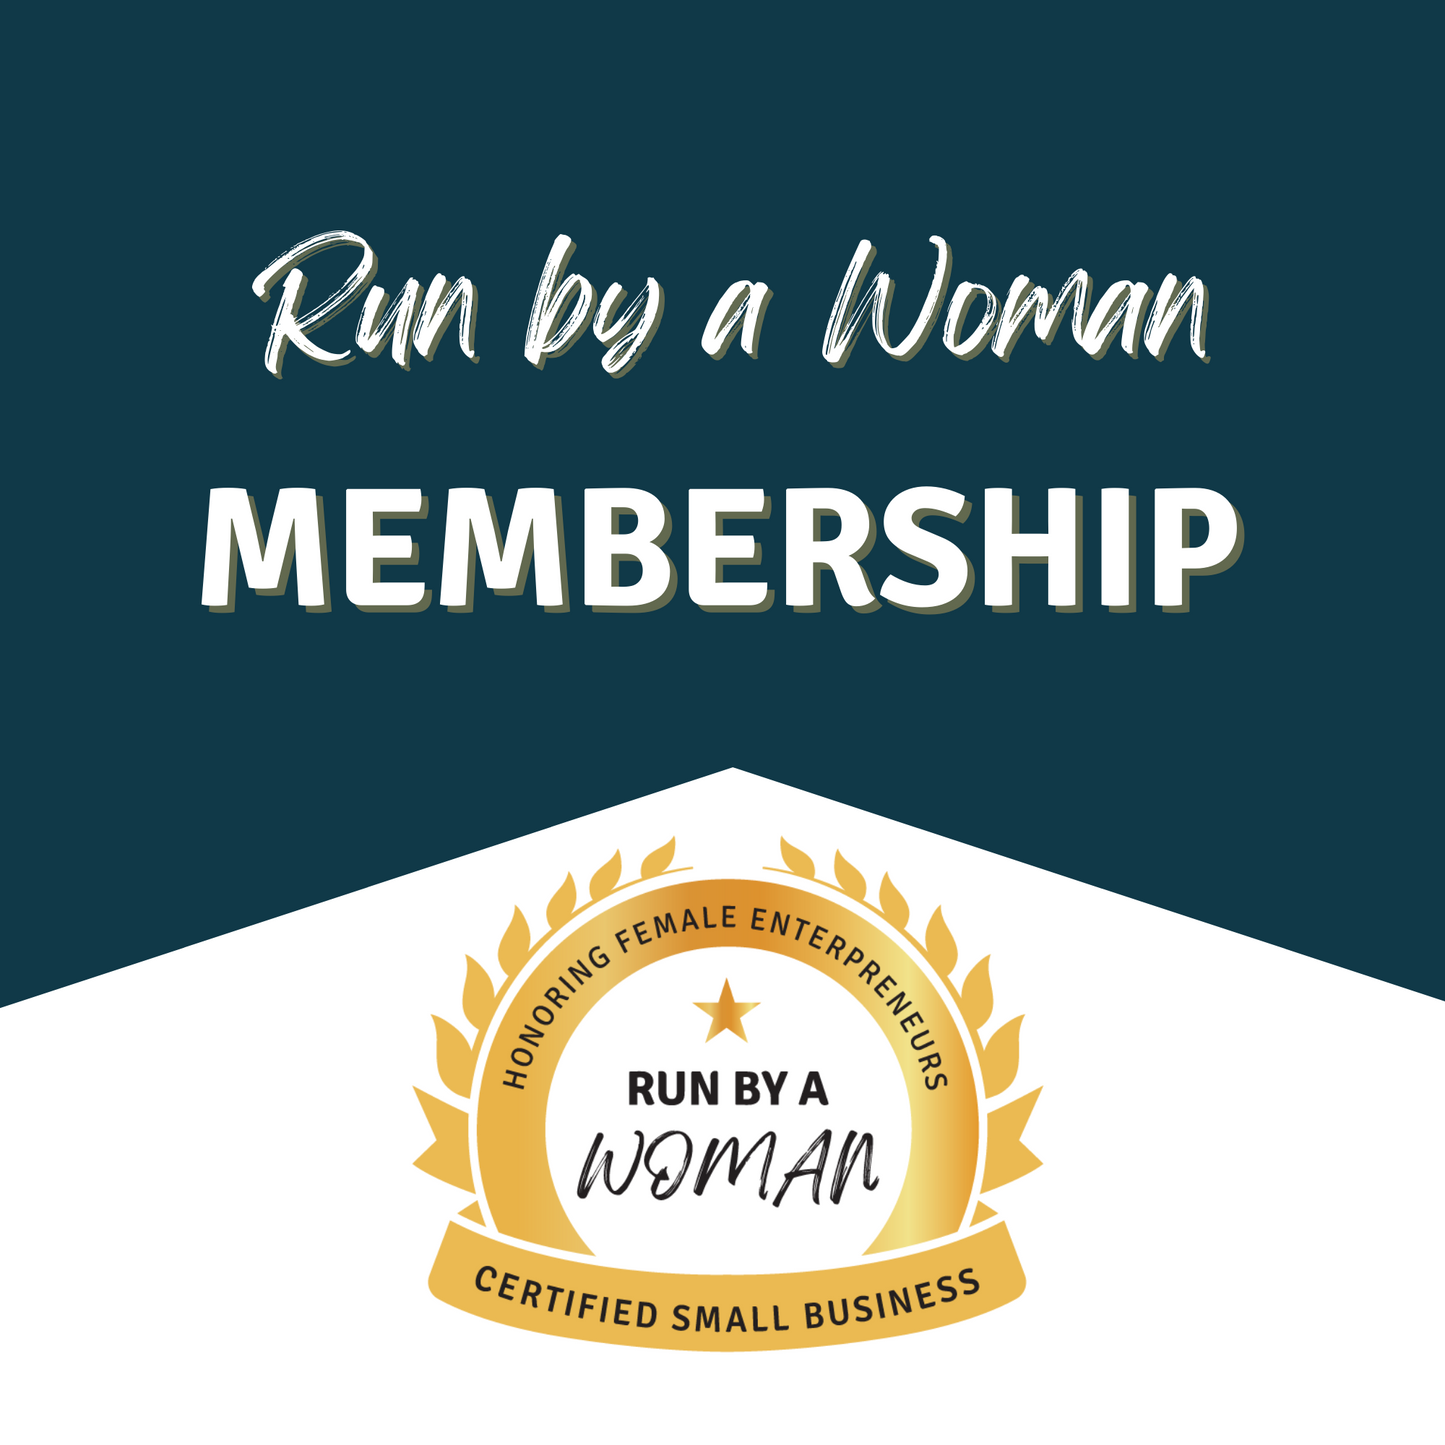 Run by a Woman Certification Application